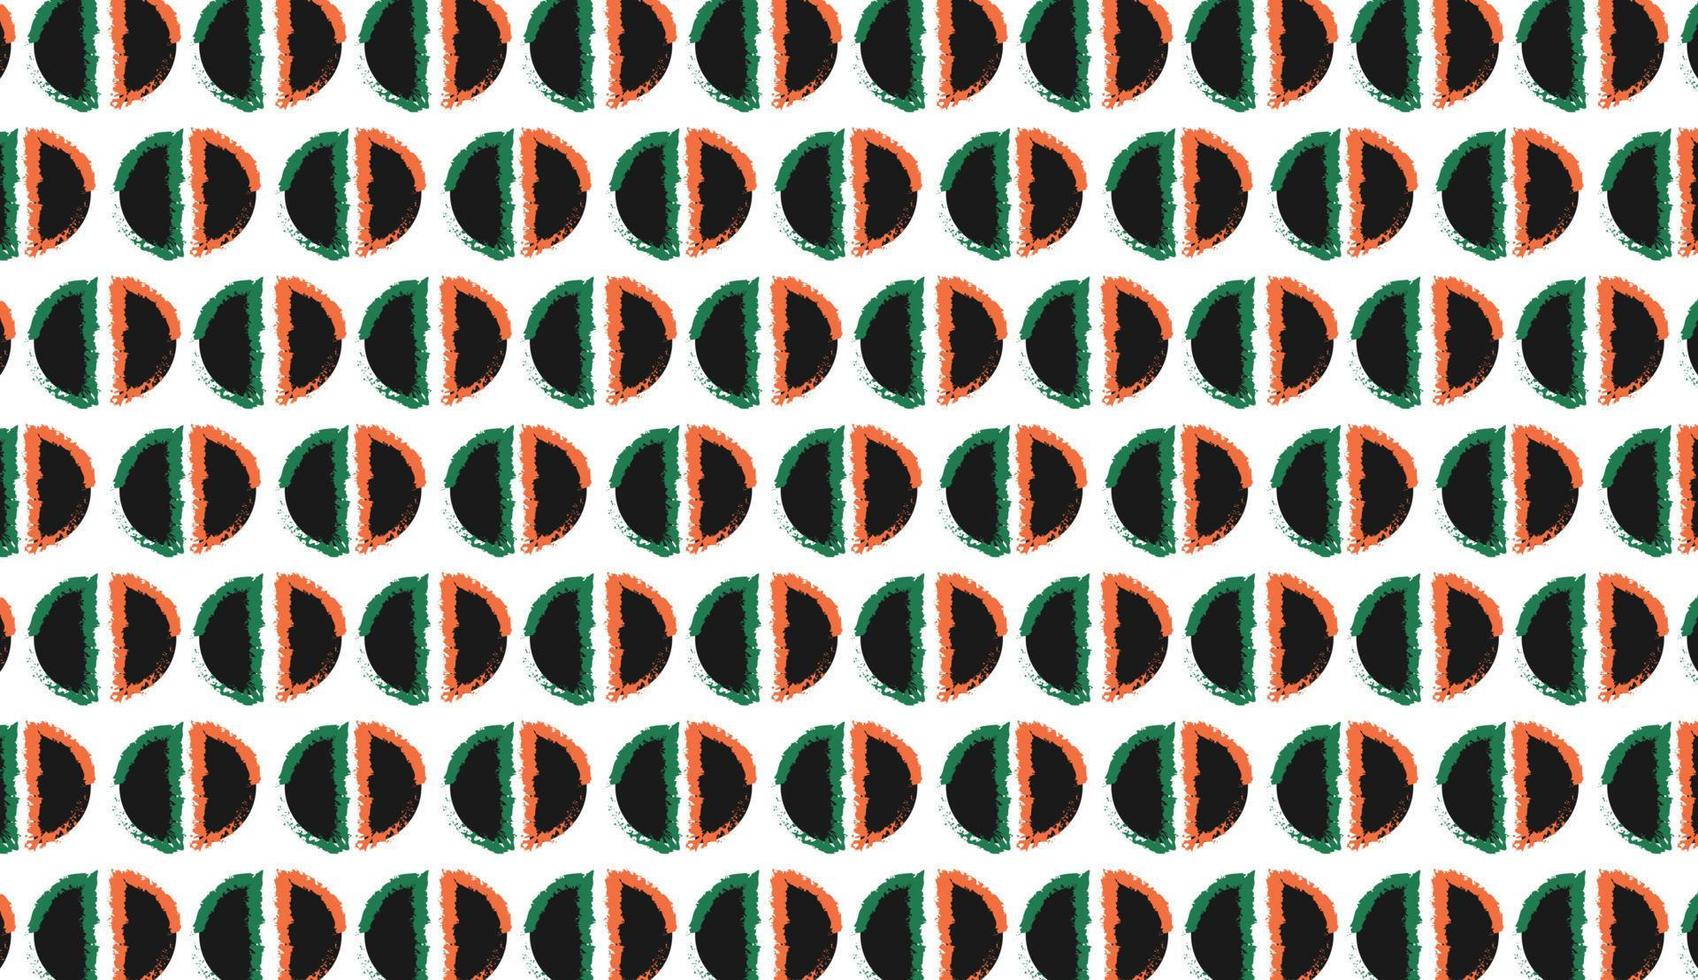 Semicircle seamless pattern. Modern style motif design. Can be used for posters, brochures, postcards, and other printing needs. Vector illustration